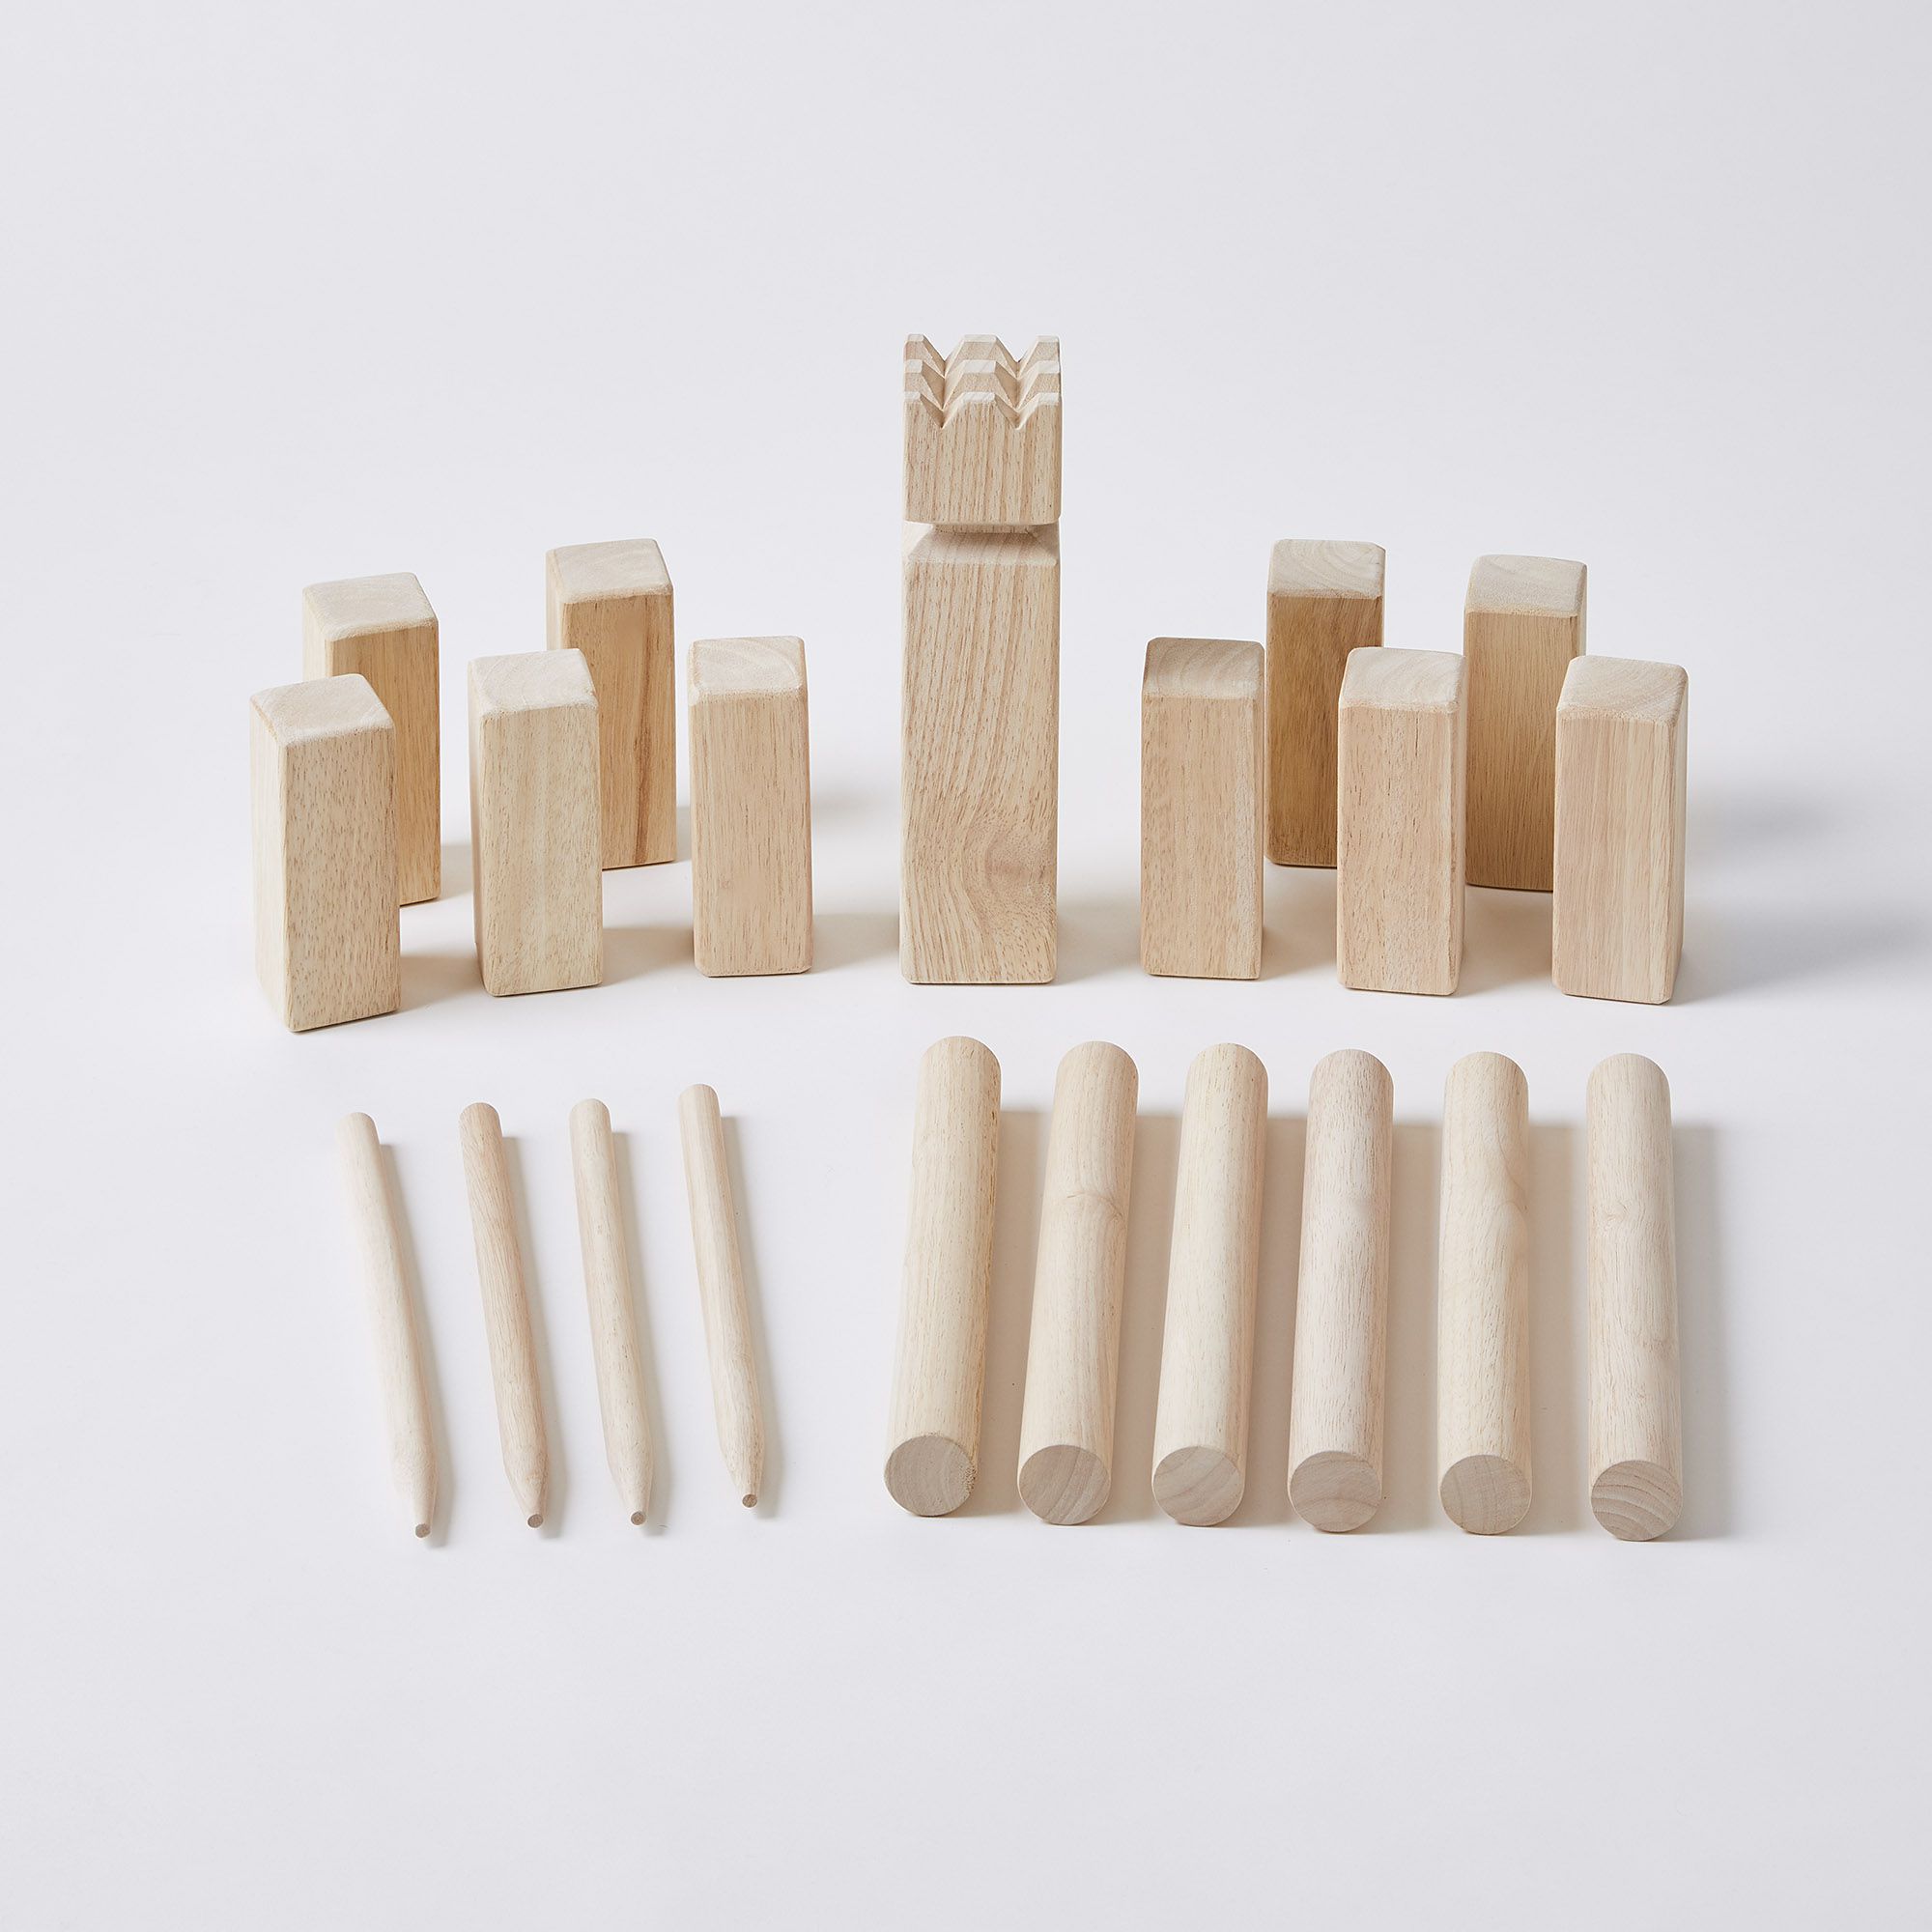 Yard Games Wooden Kubb Outdoor Lawn Games on Food52